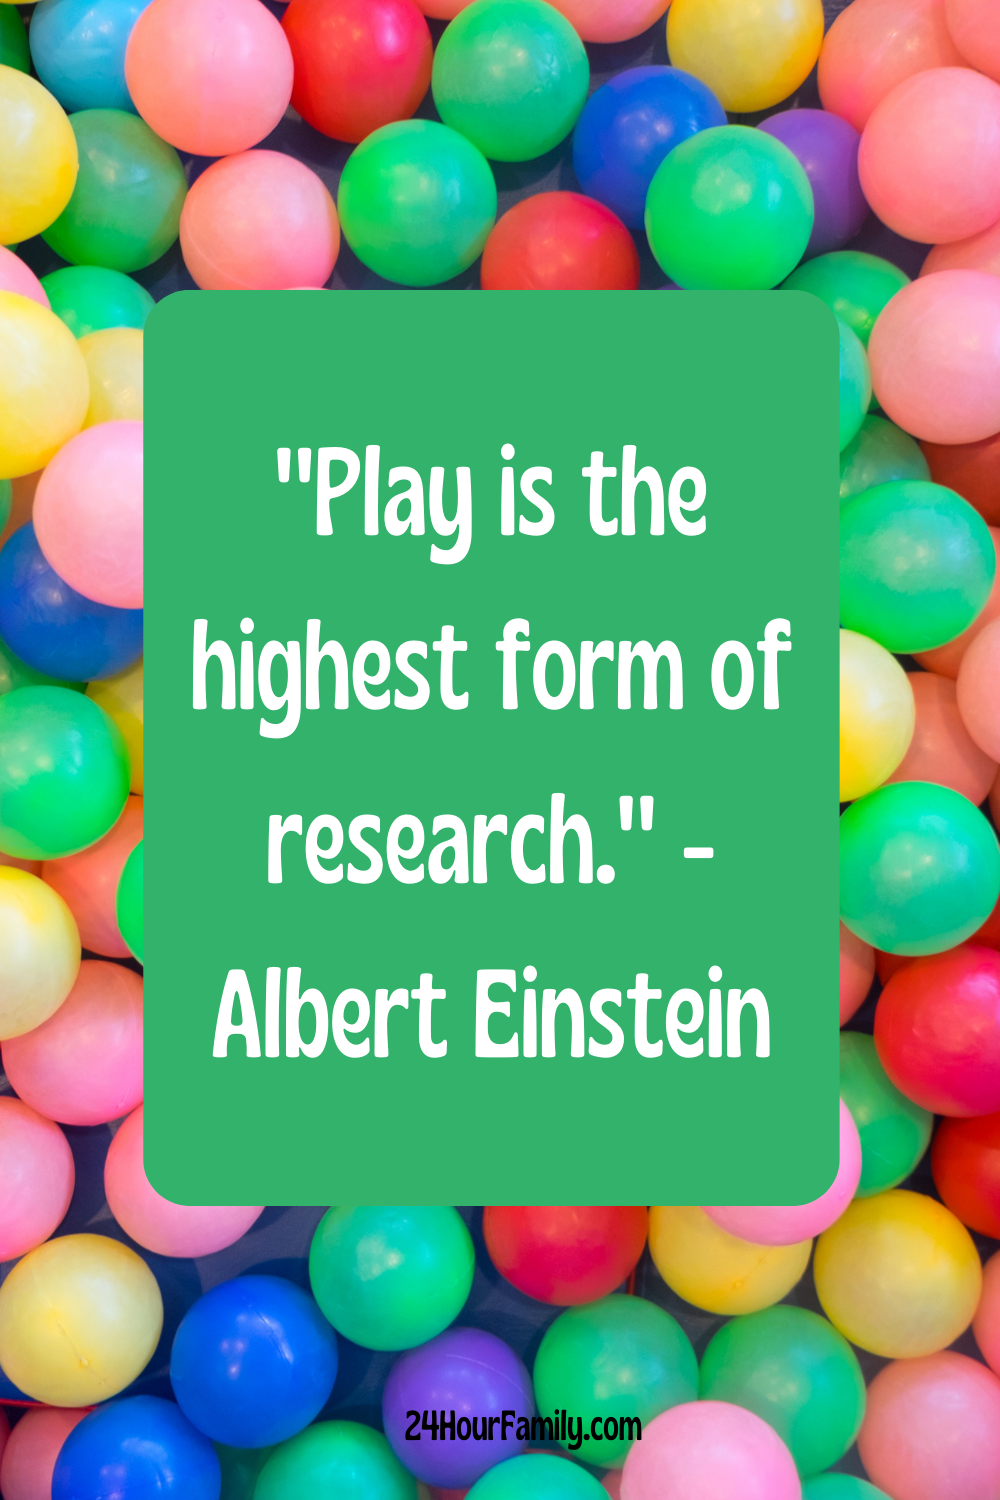 70 Quotes About Play for Kids and Families